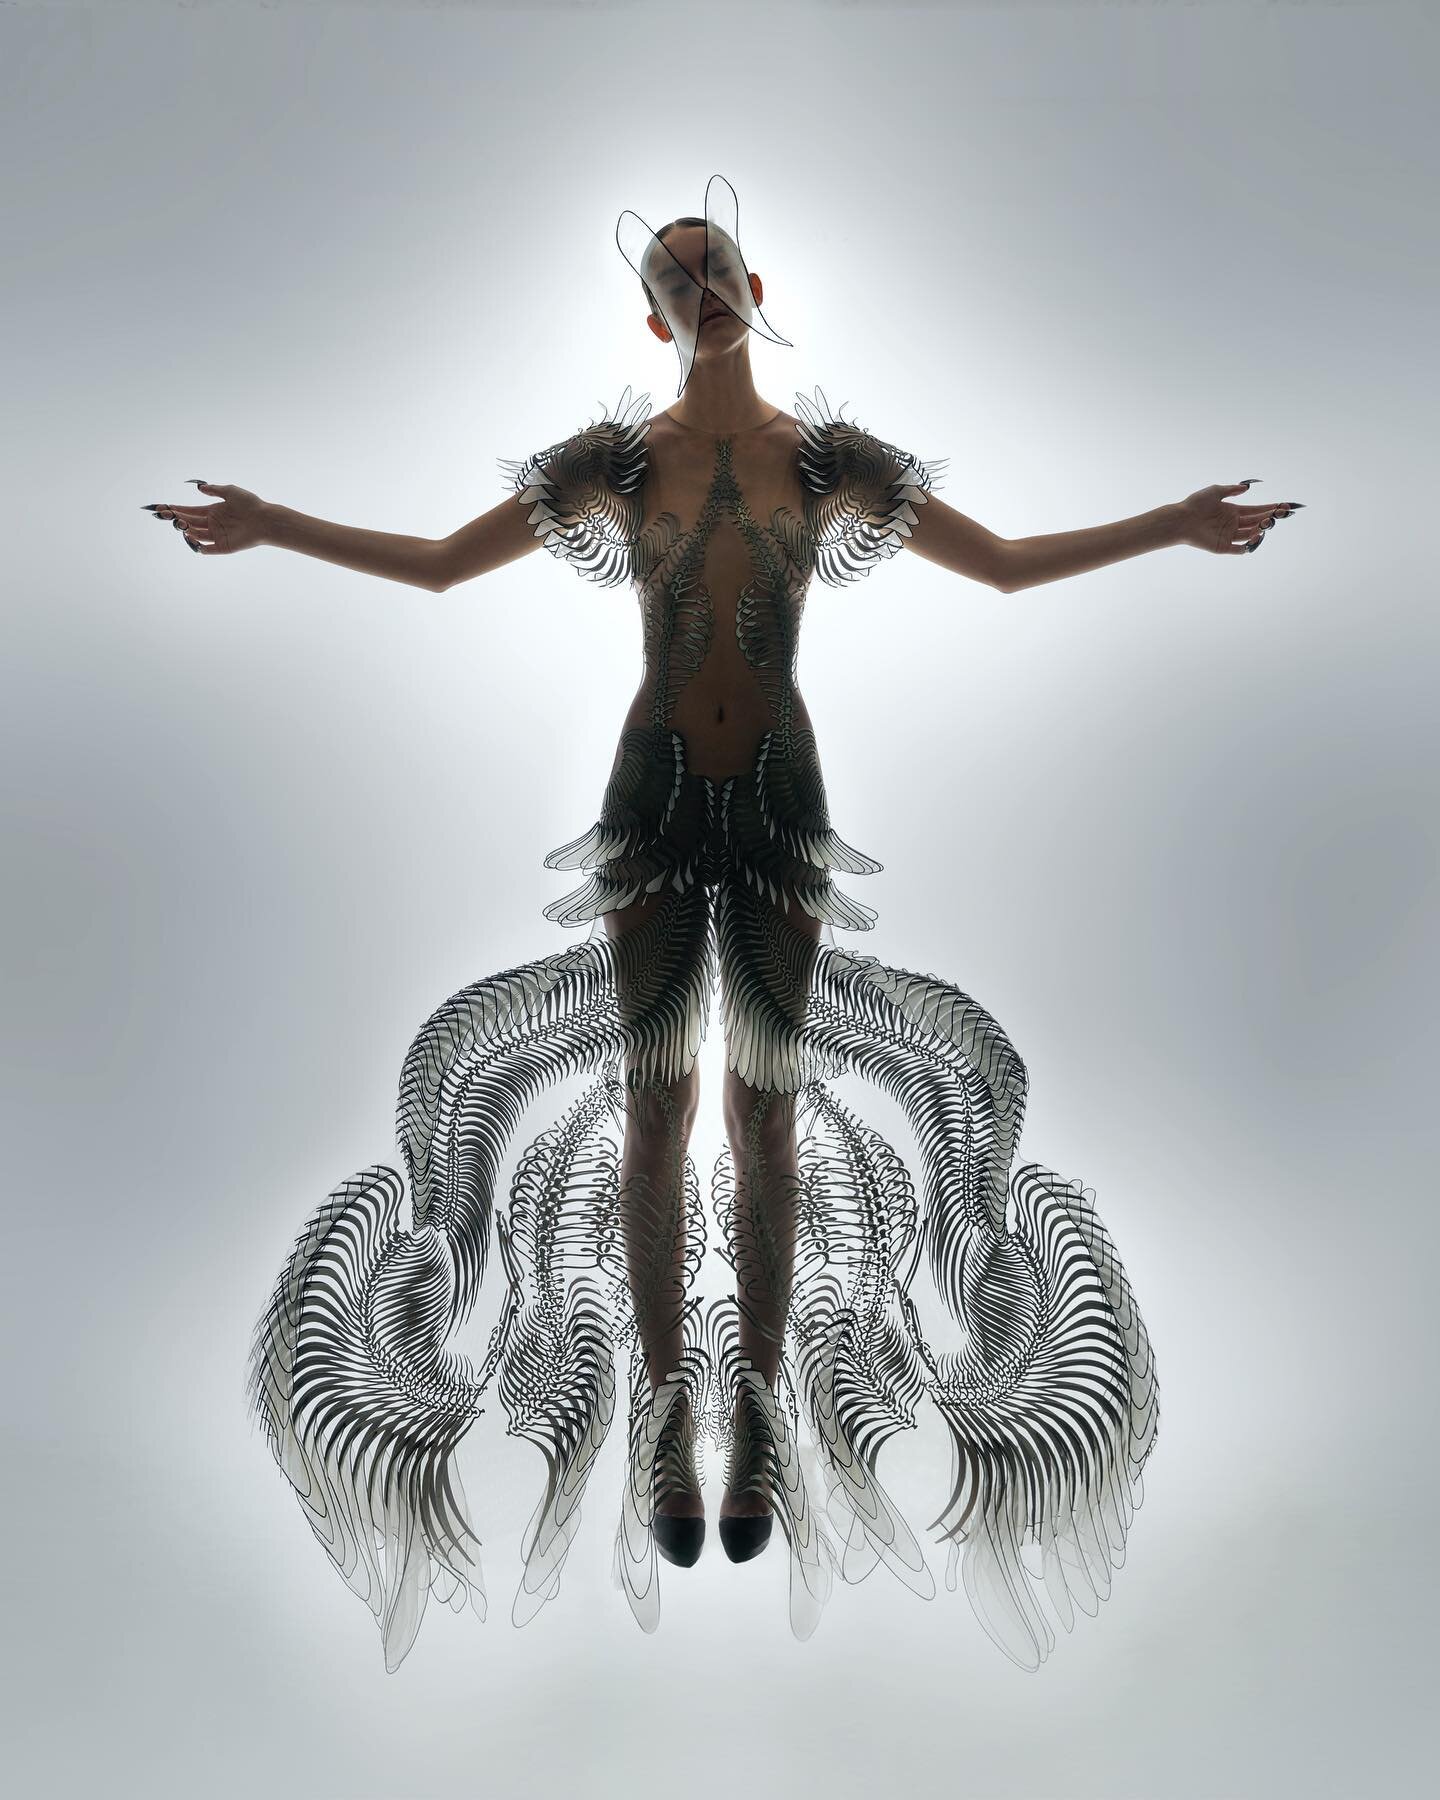 Lost in the midst of transcendence, as the spirit moves through the body&rsquo;s labyrinth. 
.
It has always been a huge dream of mine to create an ethereal moment with @irisvanherpen. Incredibly thankful the mastermind @alvingoh for beautifully orch